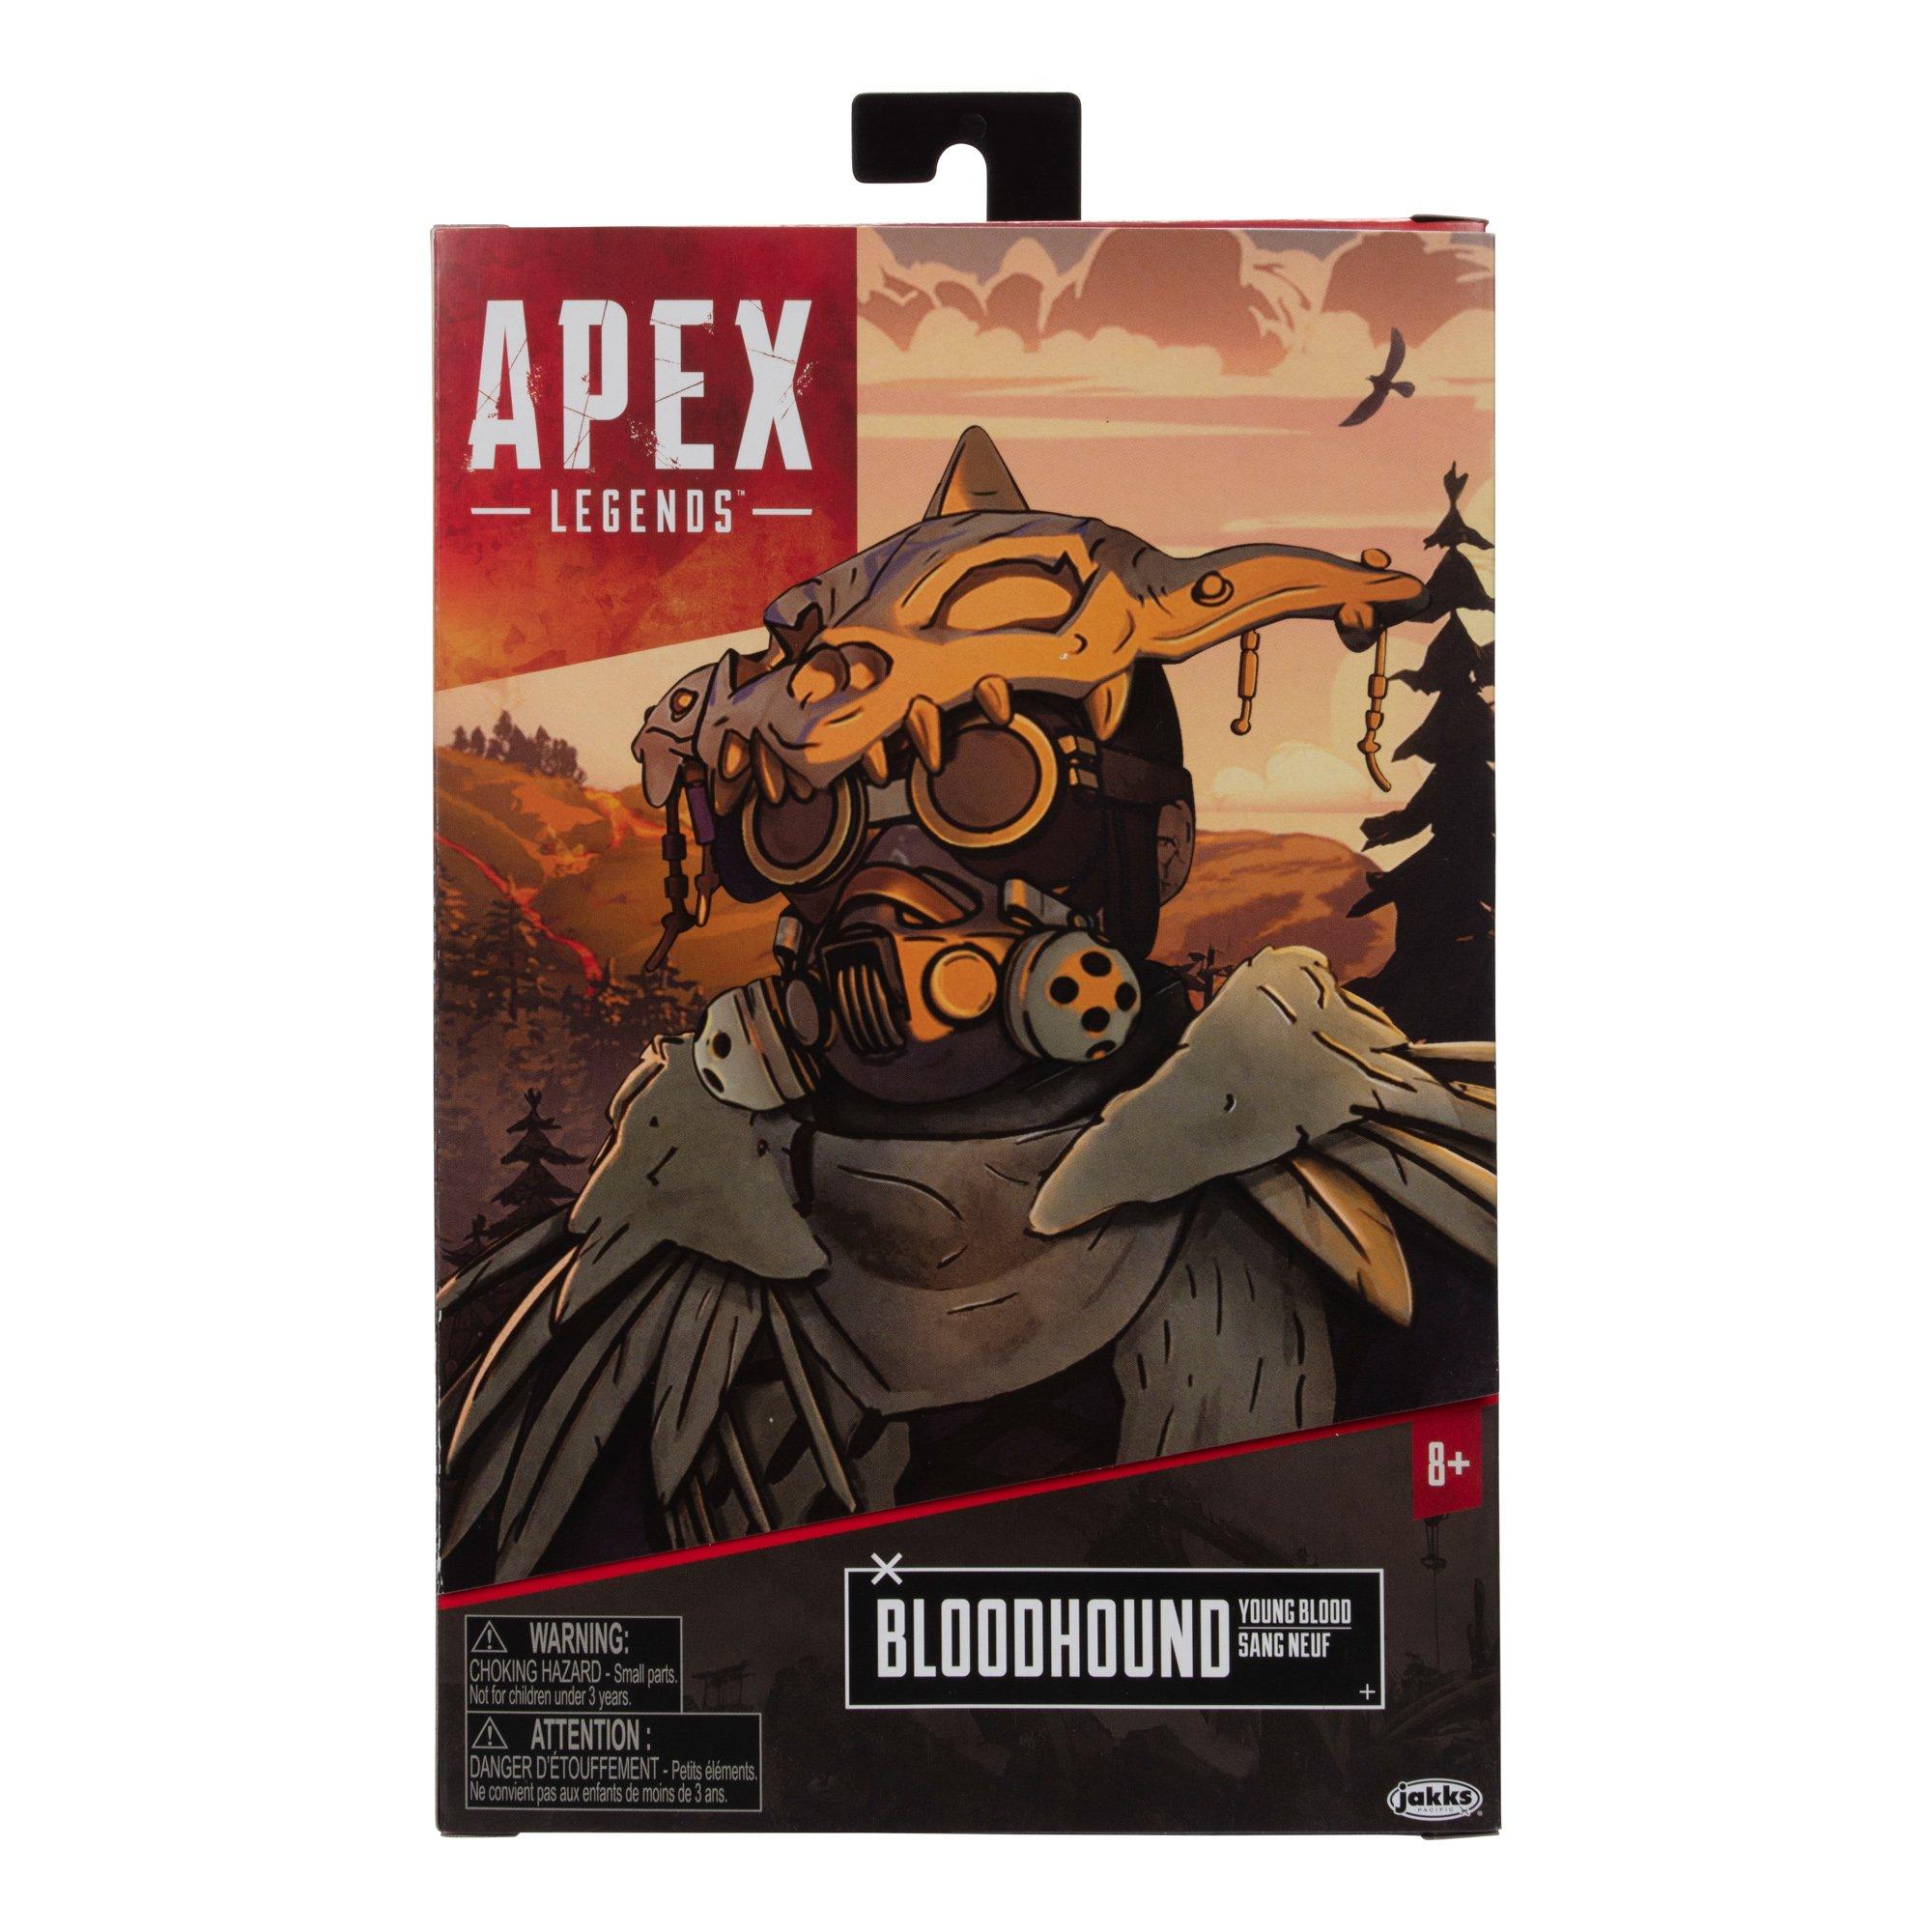 list item 11 of 14 Jakks Pacific Apex Legends: Old Ways, New Dawn Bloodhound Young Blood with Legendary Skin 6-in Action Figure GameStop Exclusive